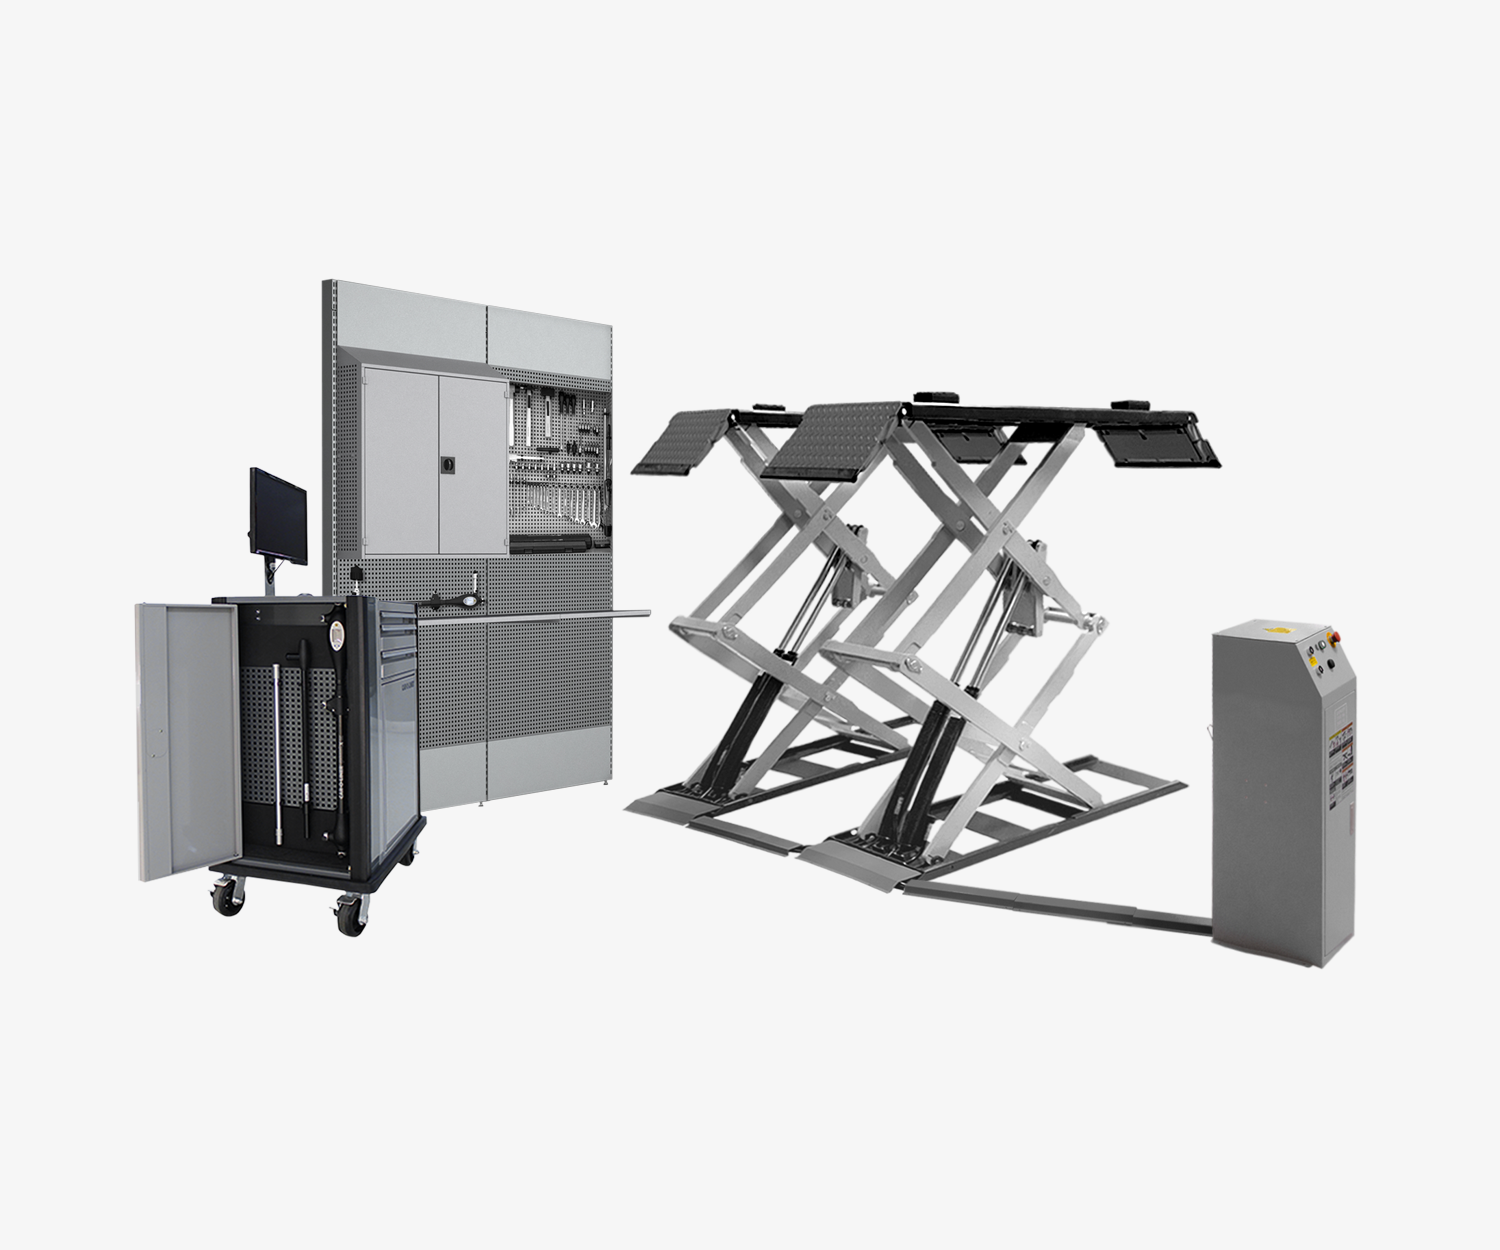 CDS™35 Double Scissor Lift, the PointX® II with storage wagon, and a WSS 2-wall module with storage cabinets and hooks for equipment